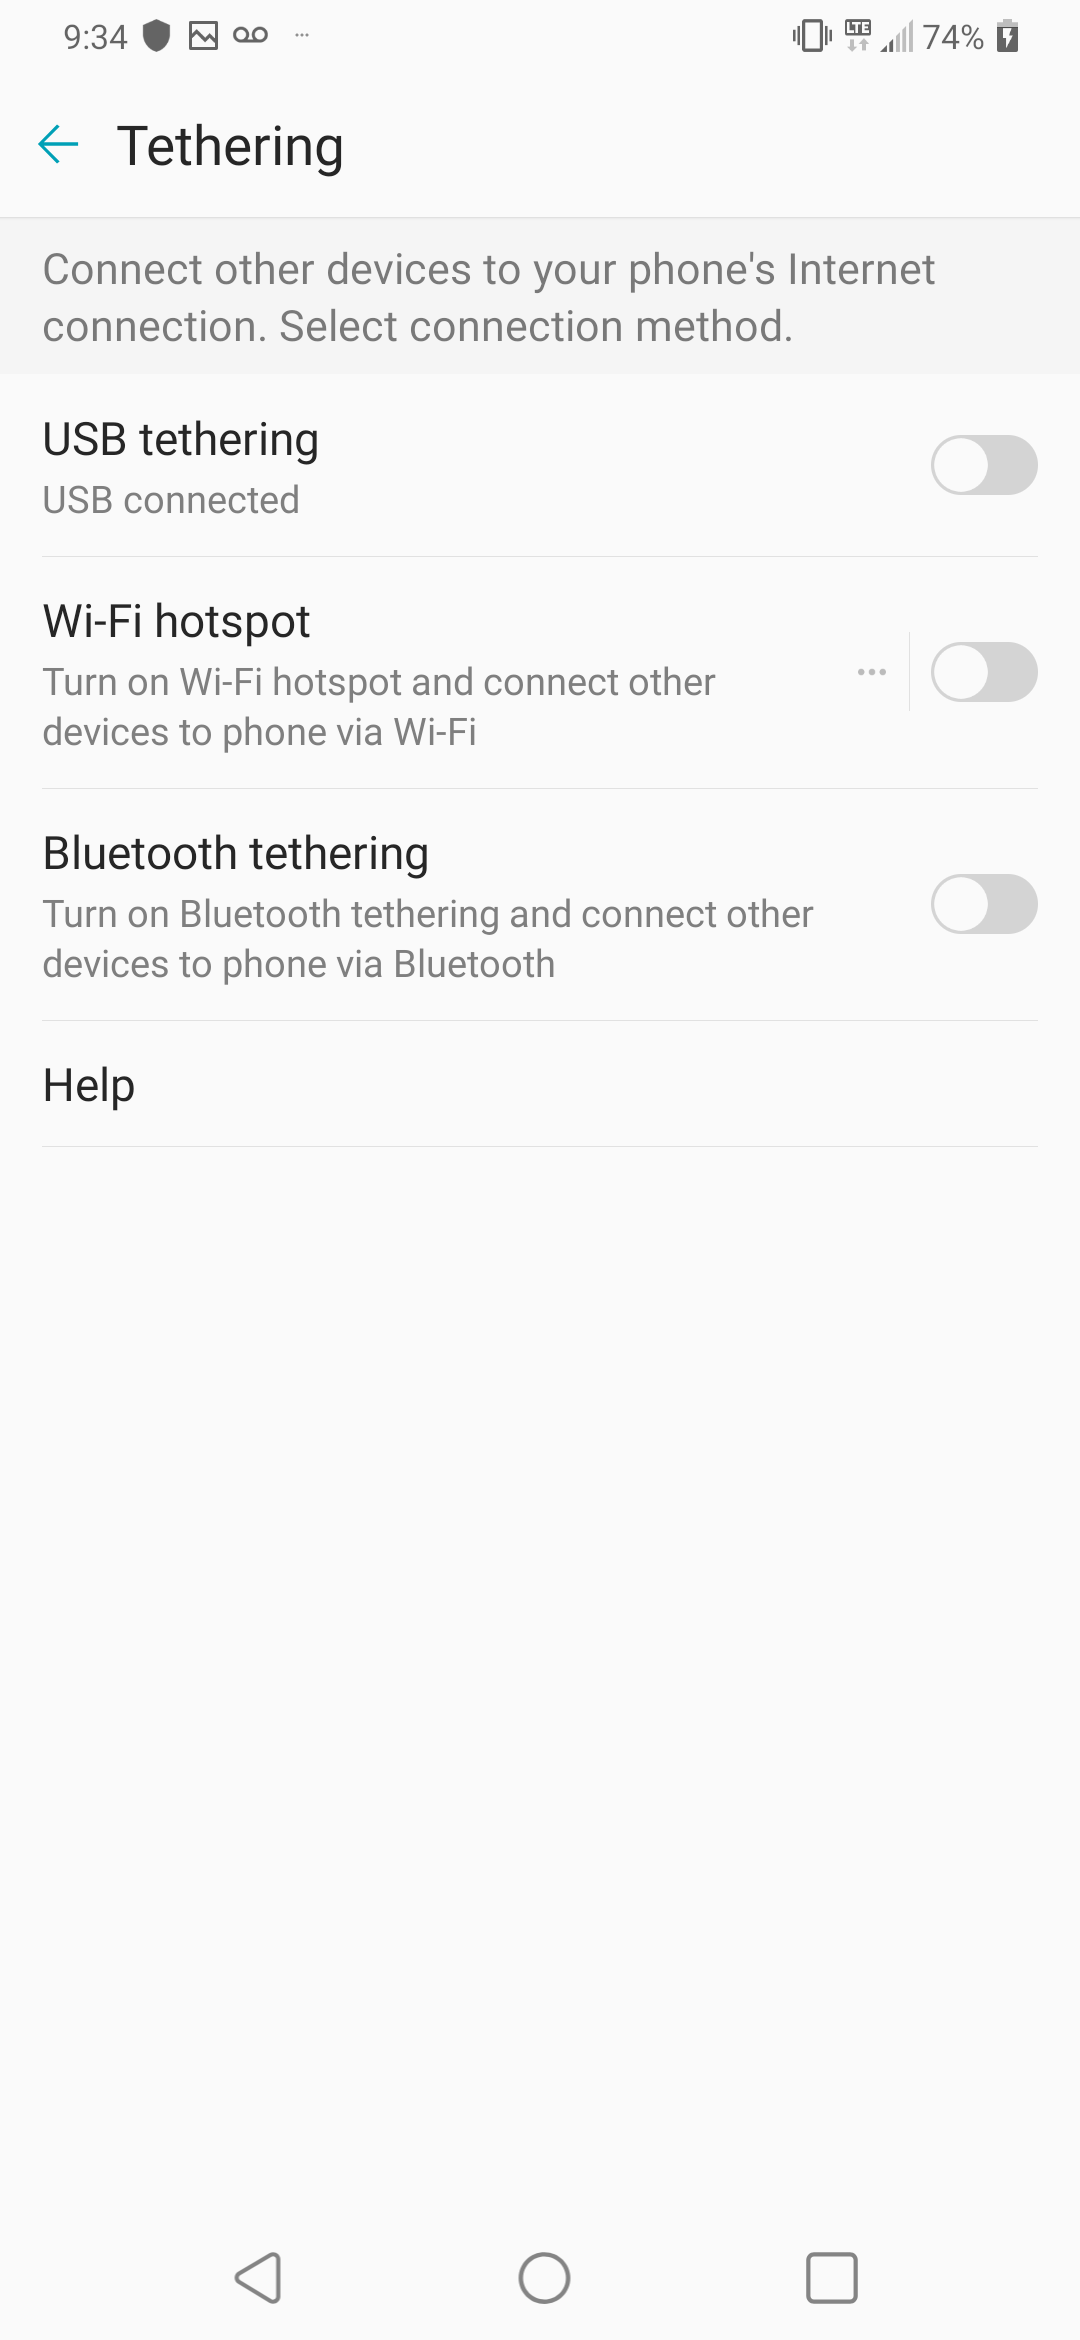 Touch the USB tethering slider to turn it on.